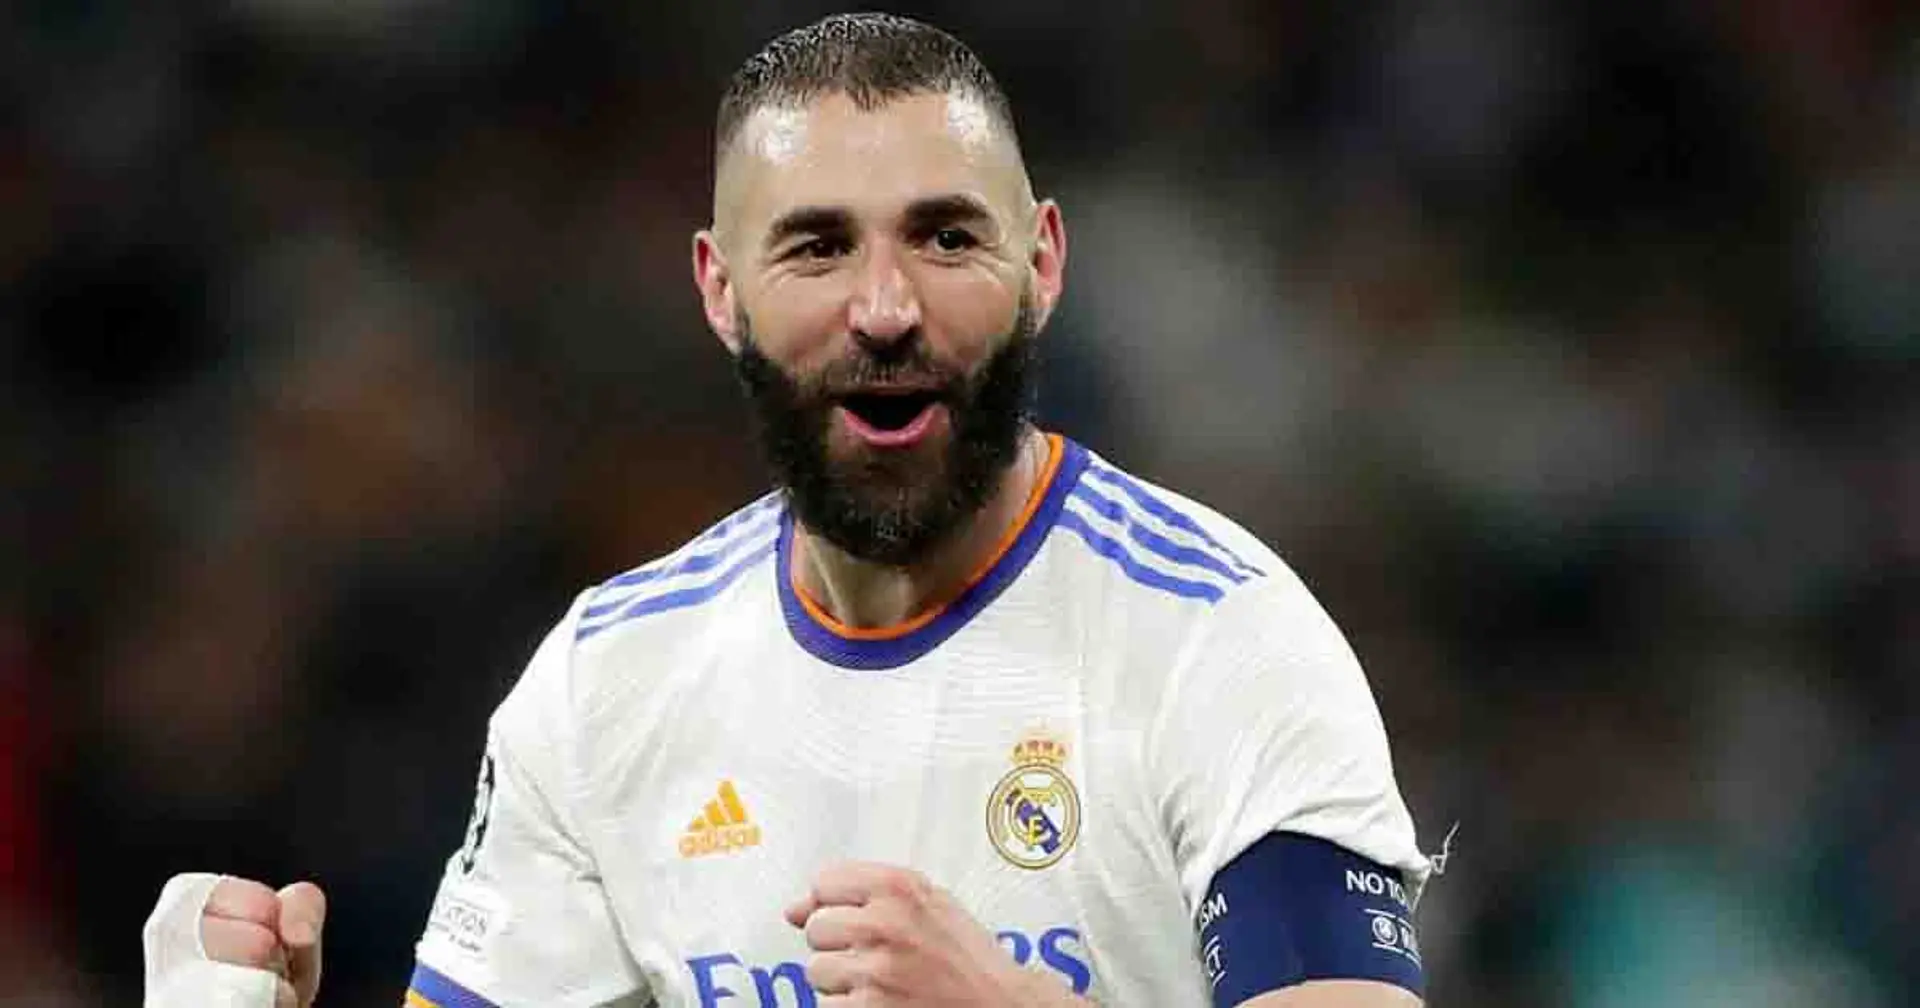 Explained: why Karim Benzema is back training with Real Madrid